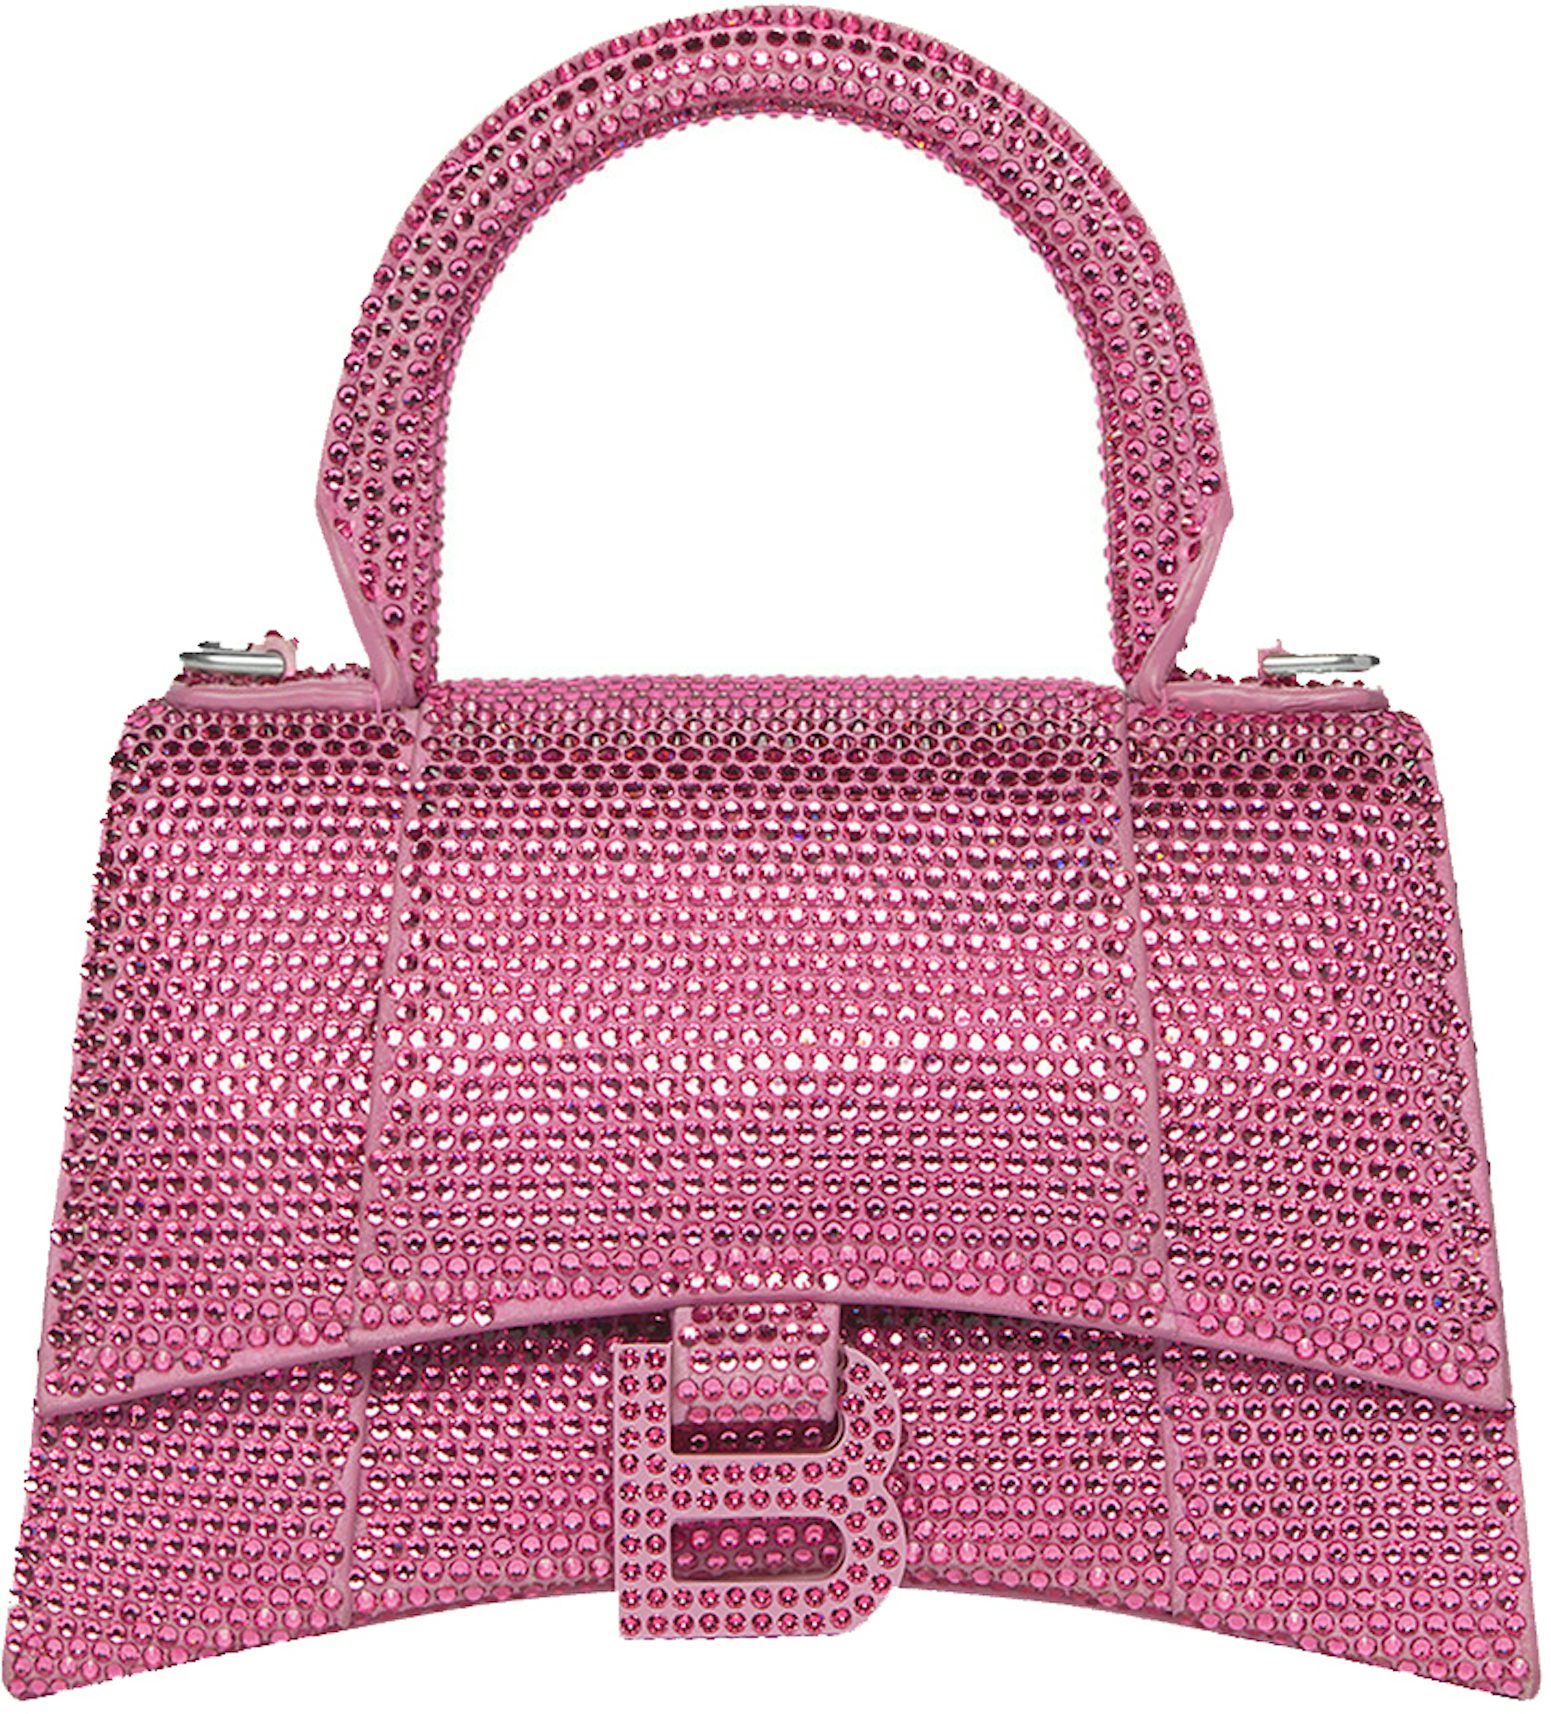 Balenciaga Hourglass XS Hangbag With Rhinestones Pink in Suede